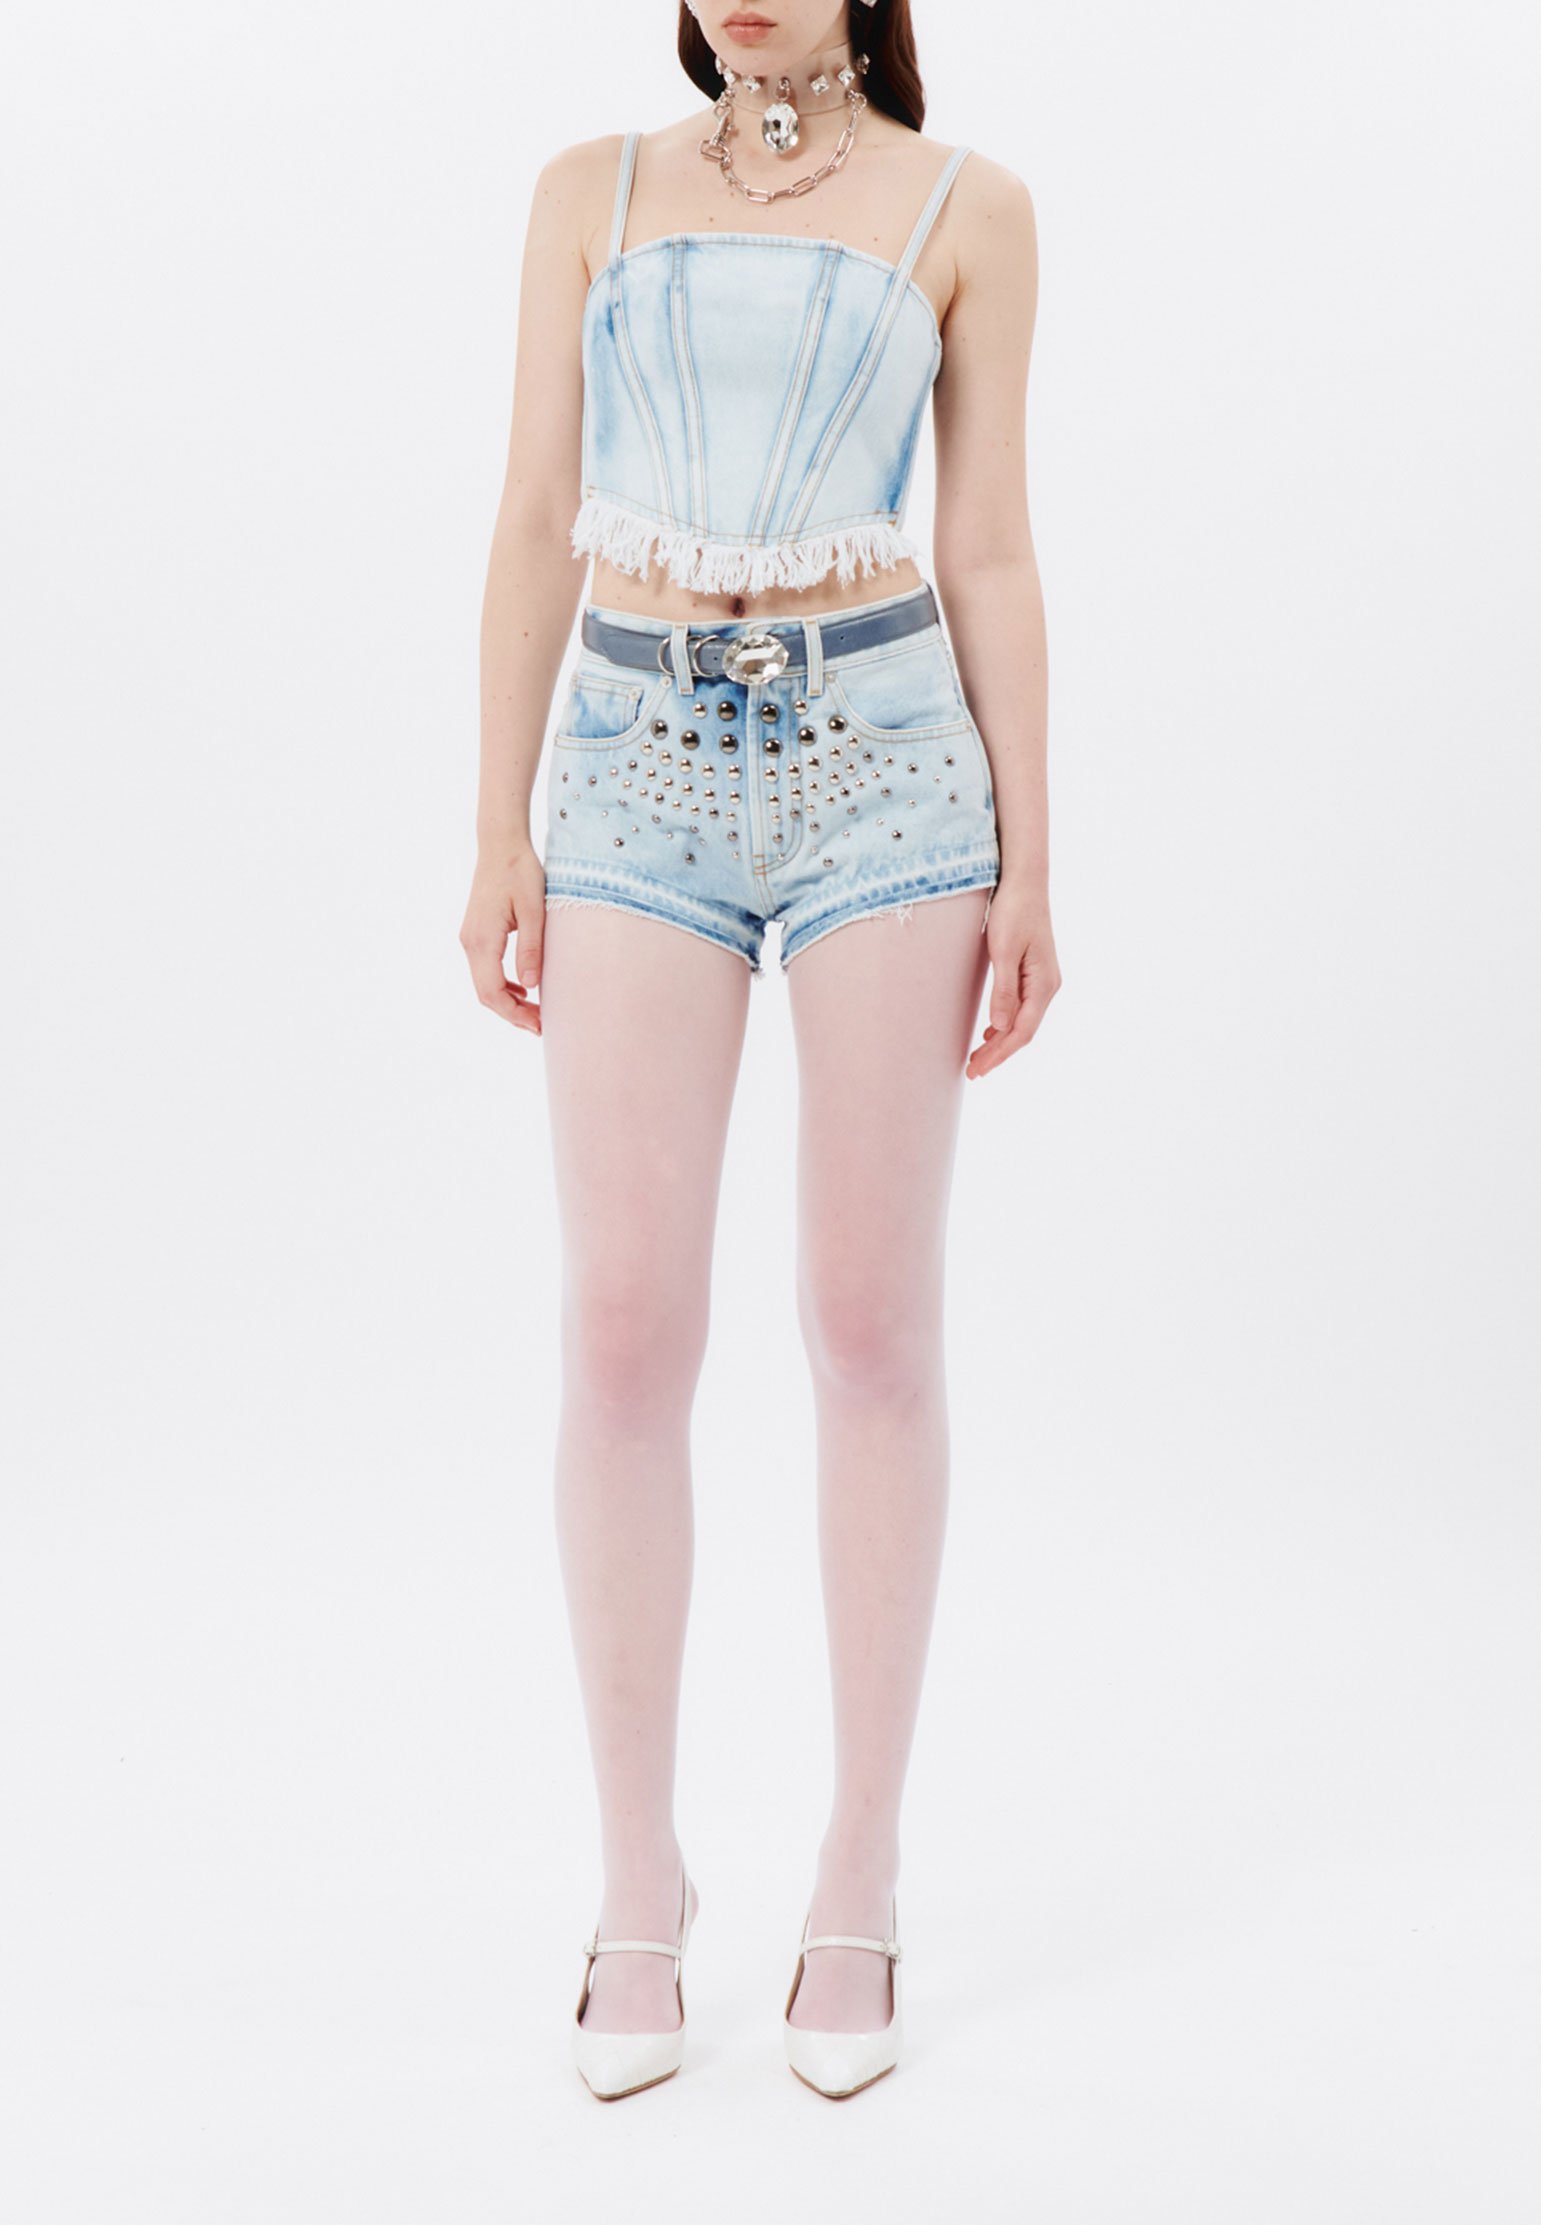 Shorts ALESSANDRA RICH Color: light blue (Code: 3735) in online store Allure